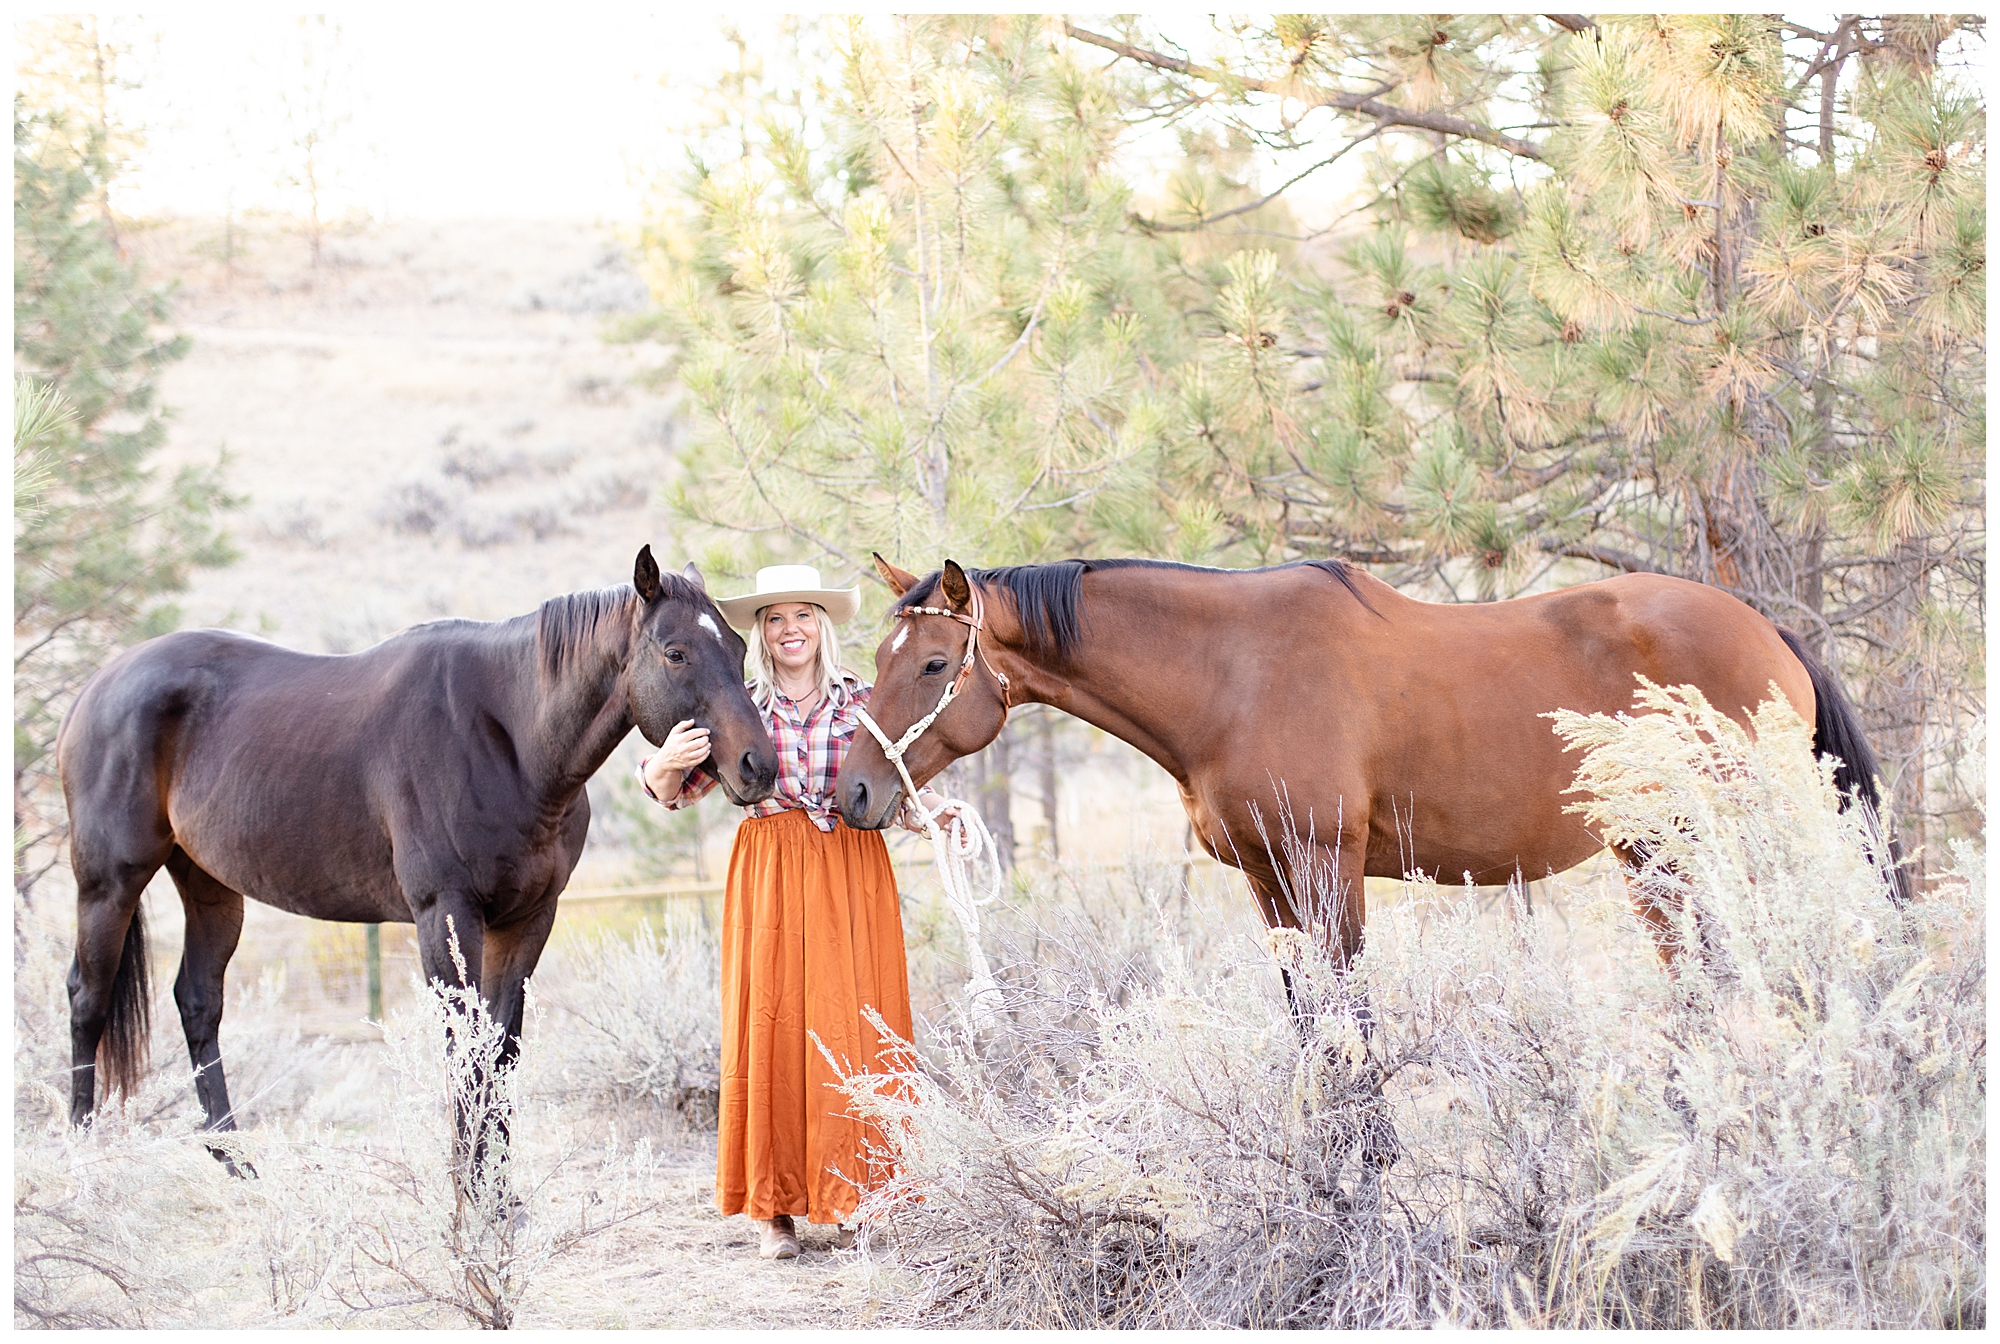 Equine photoshoot in Stevensville Montana by Montana photographer Kat's Eye On Design Photography